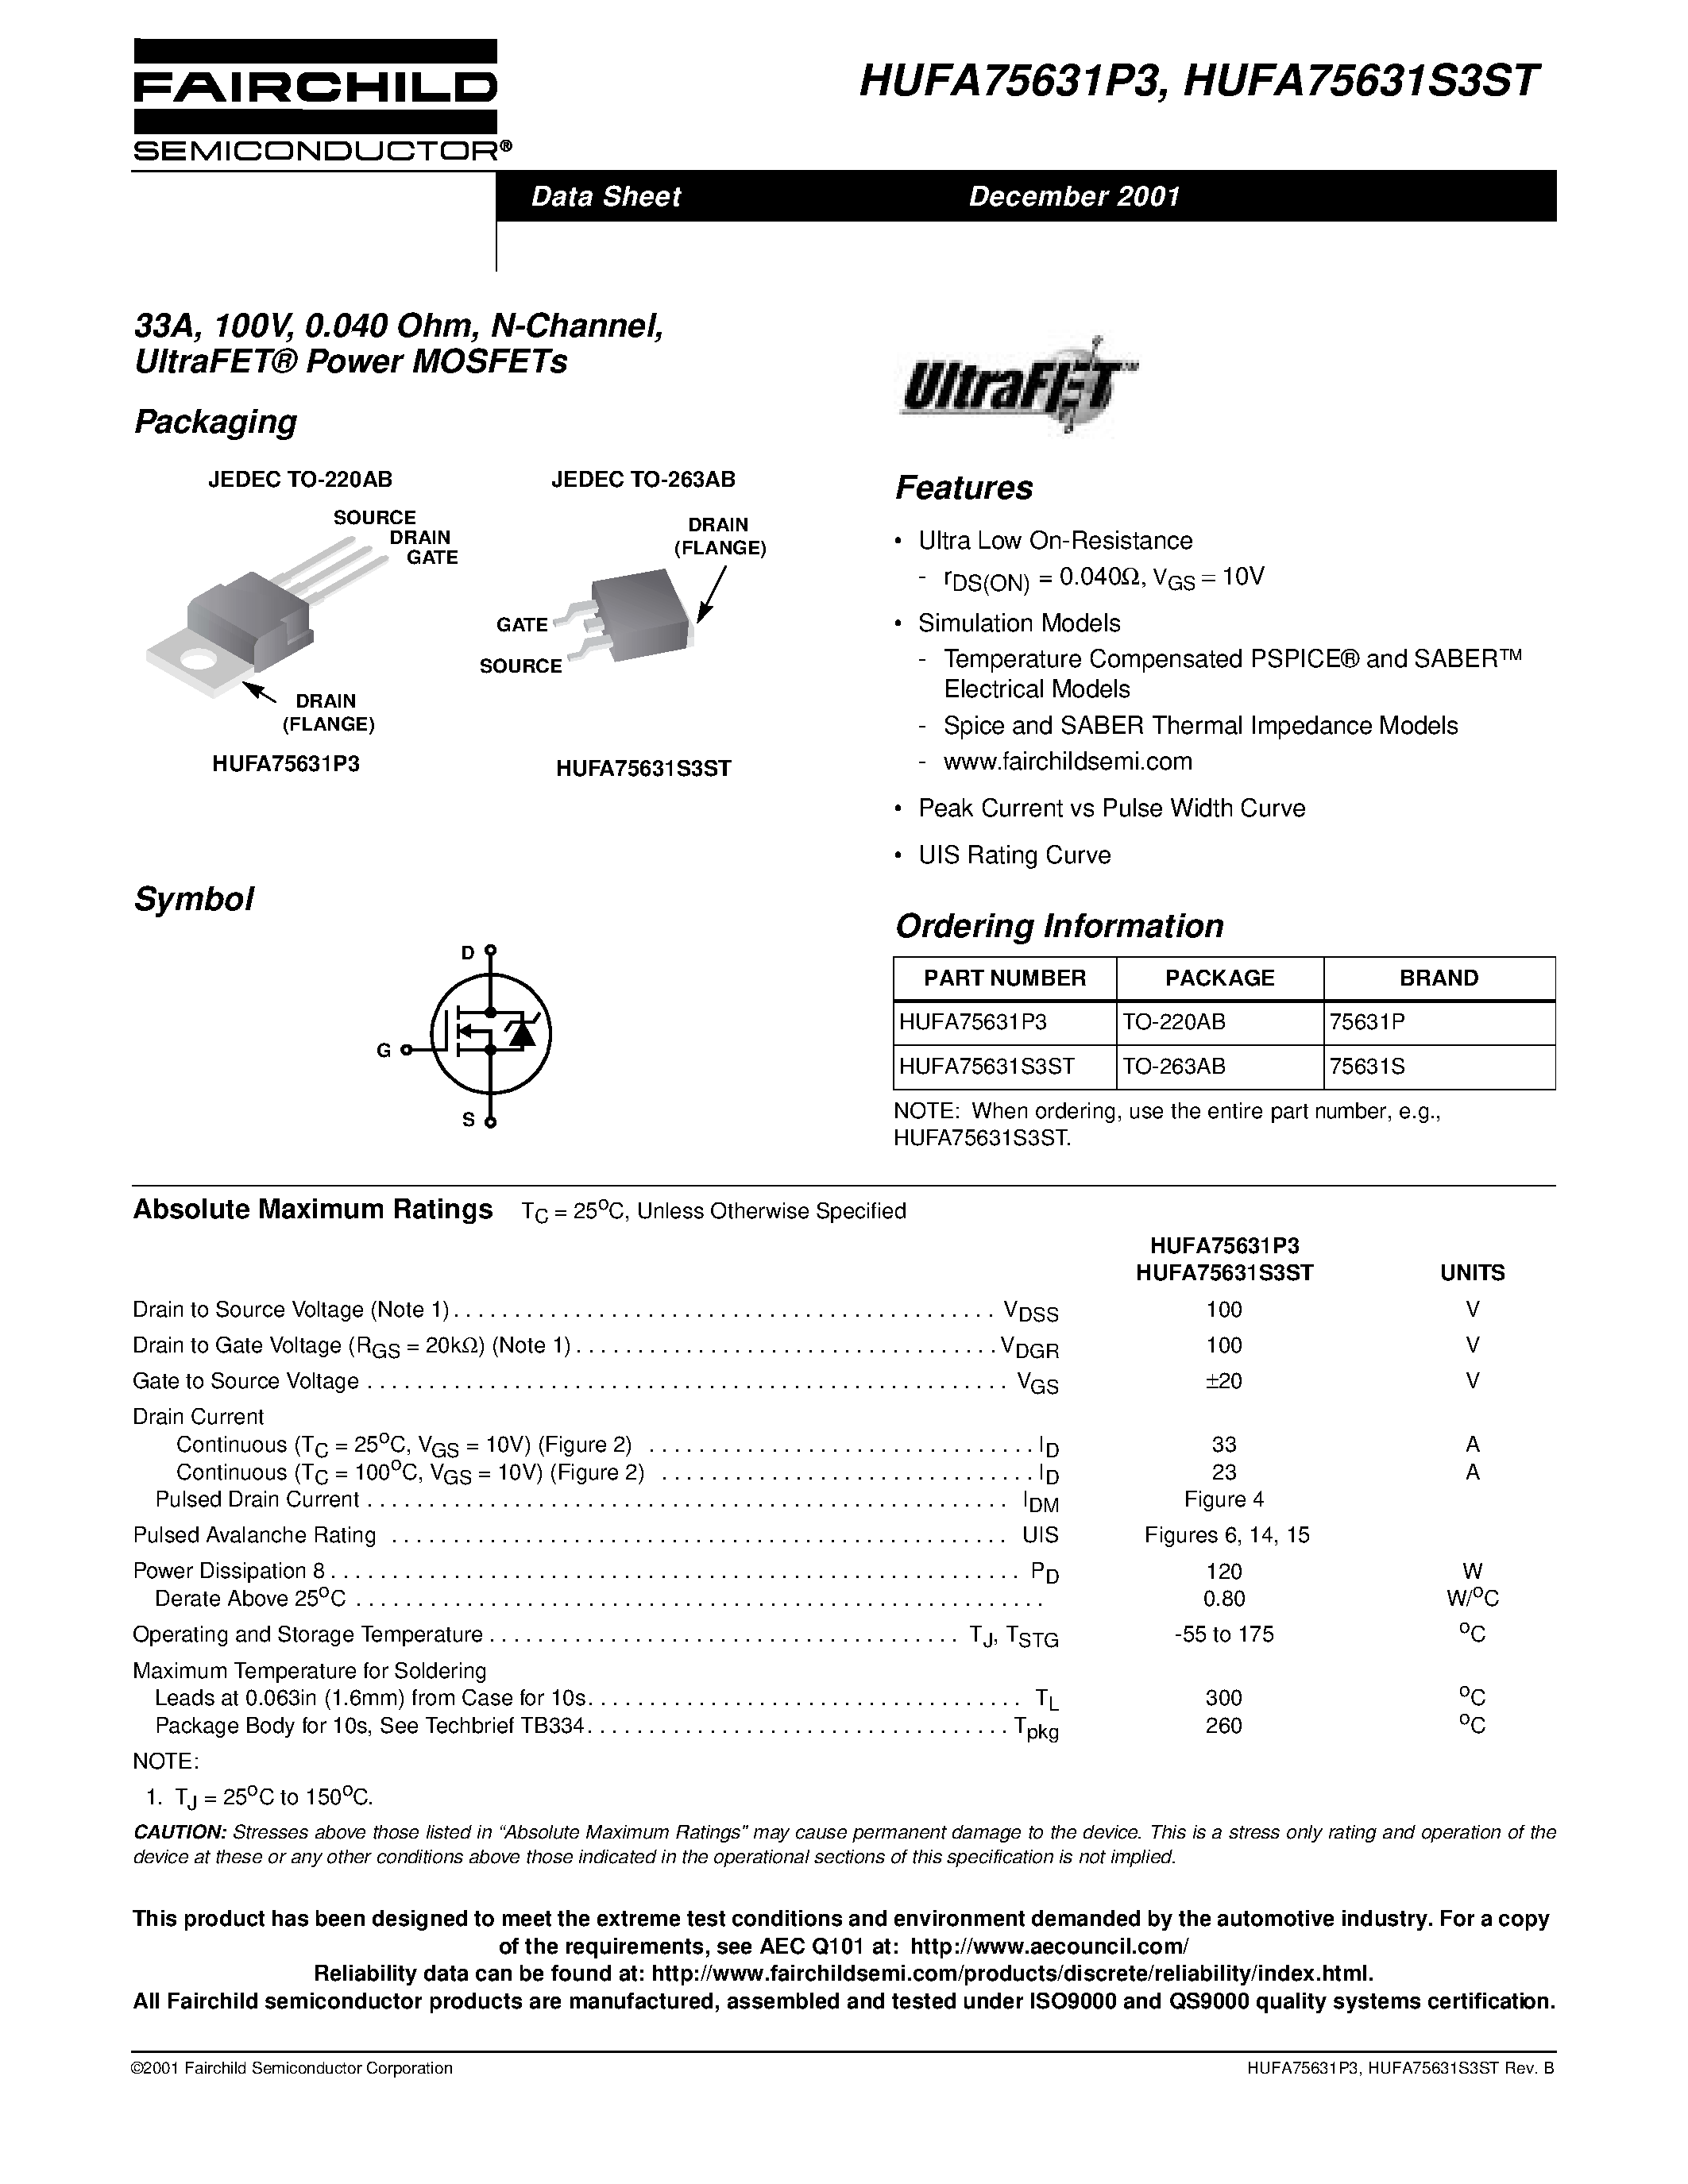 Datasheet HUFA75631S3ST - 33A/ 100V/ 0.040 Ohm/ N-Channel/ UltraFET Power MOSFETs page 1